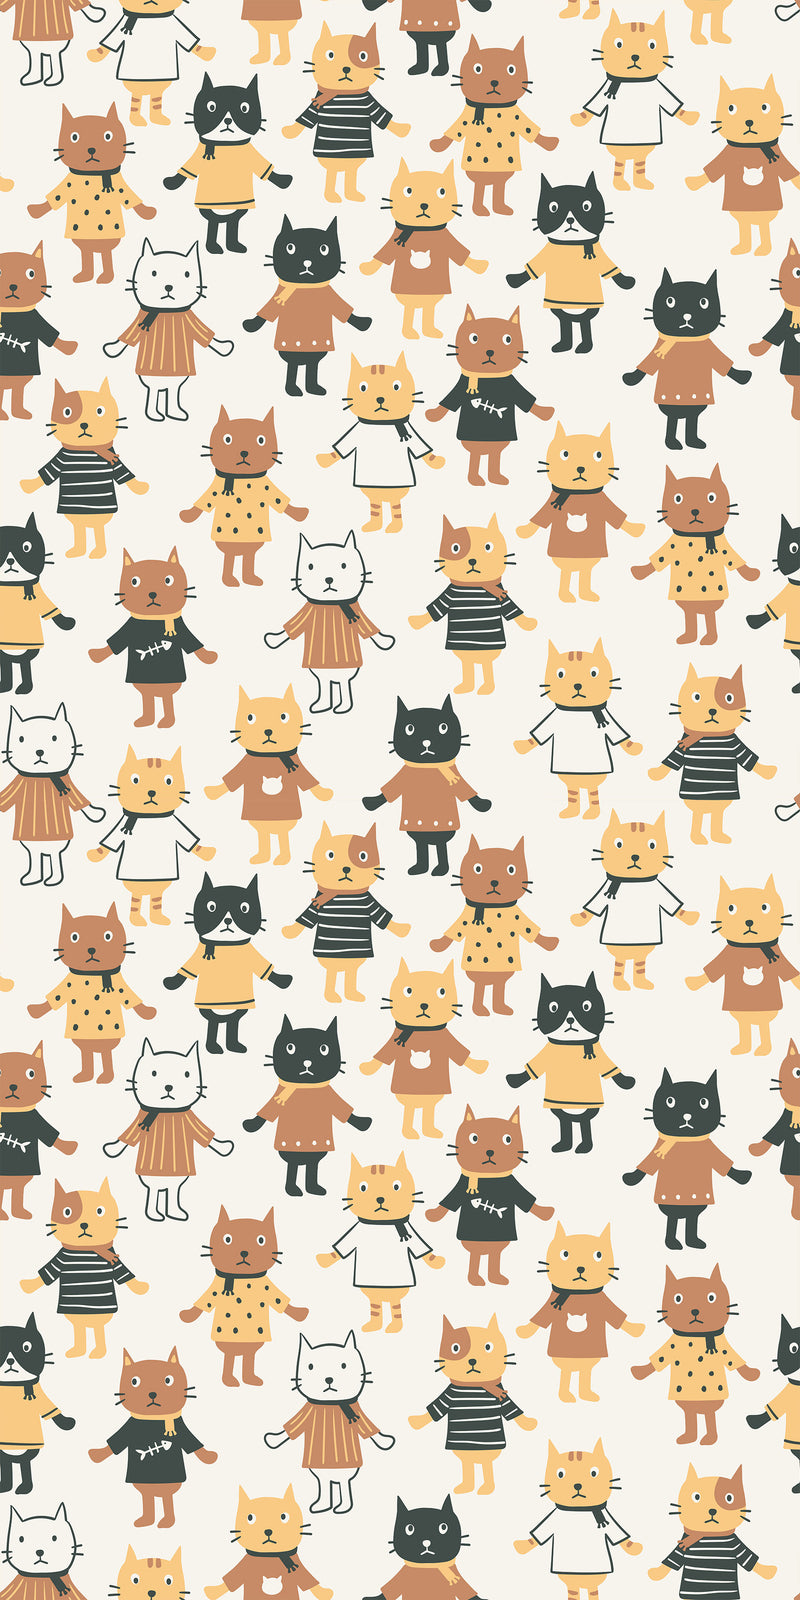 Cuddly Cats  - Peel and Stick Removable Wallpaper I Heart Wall Art Australia 